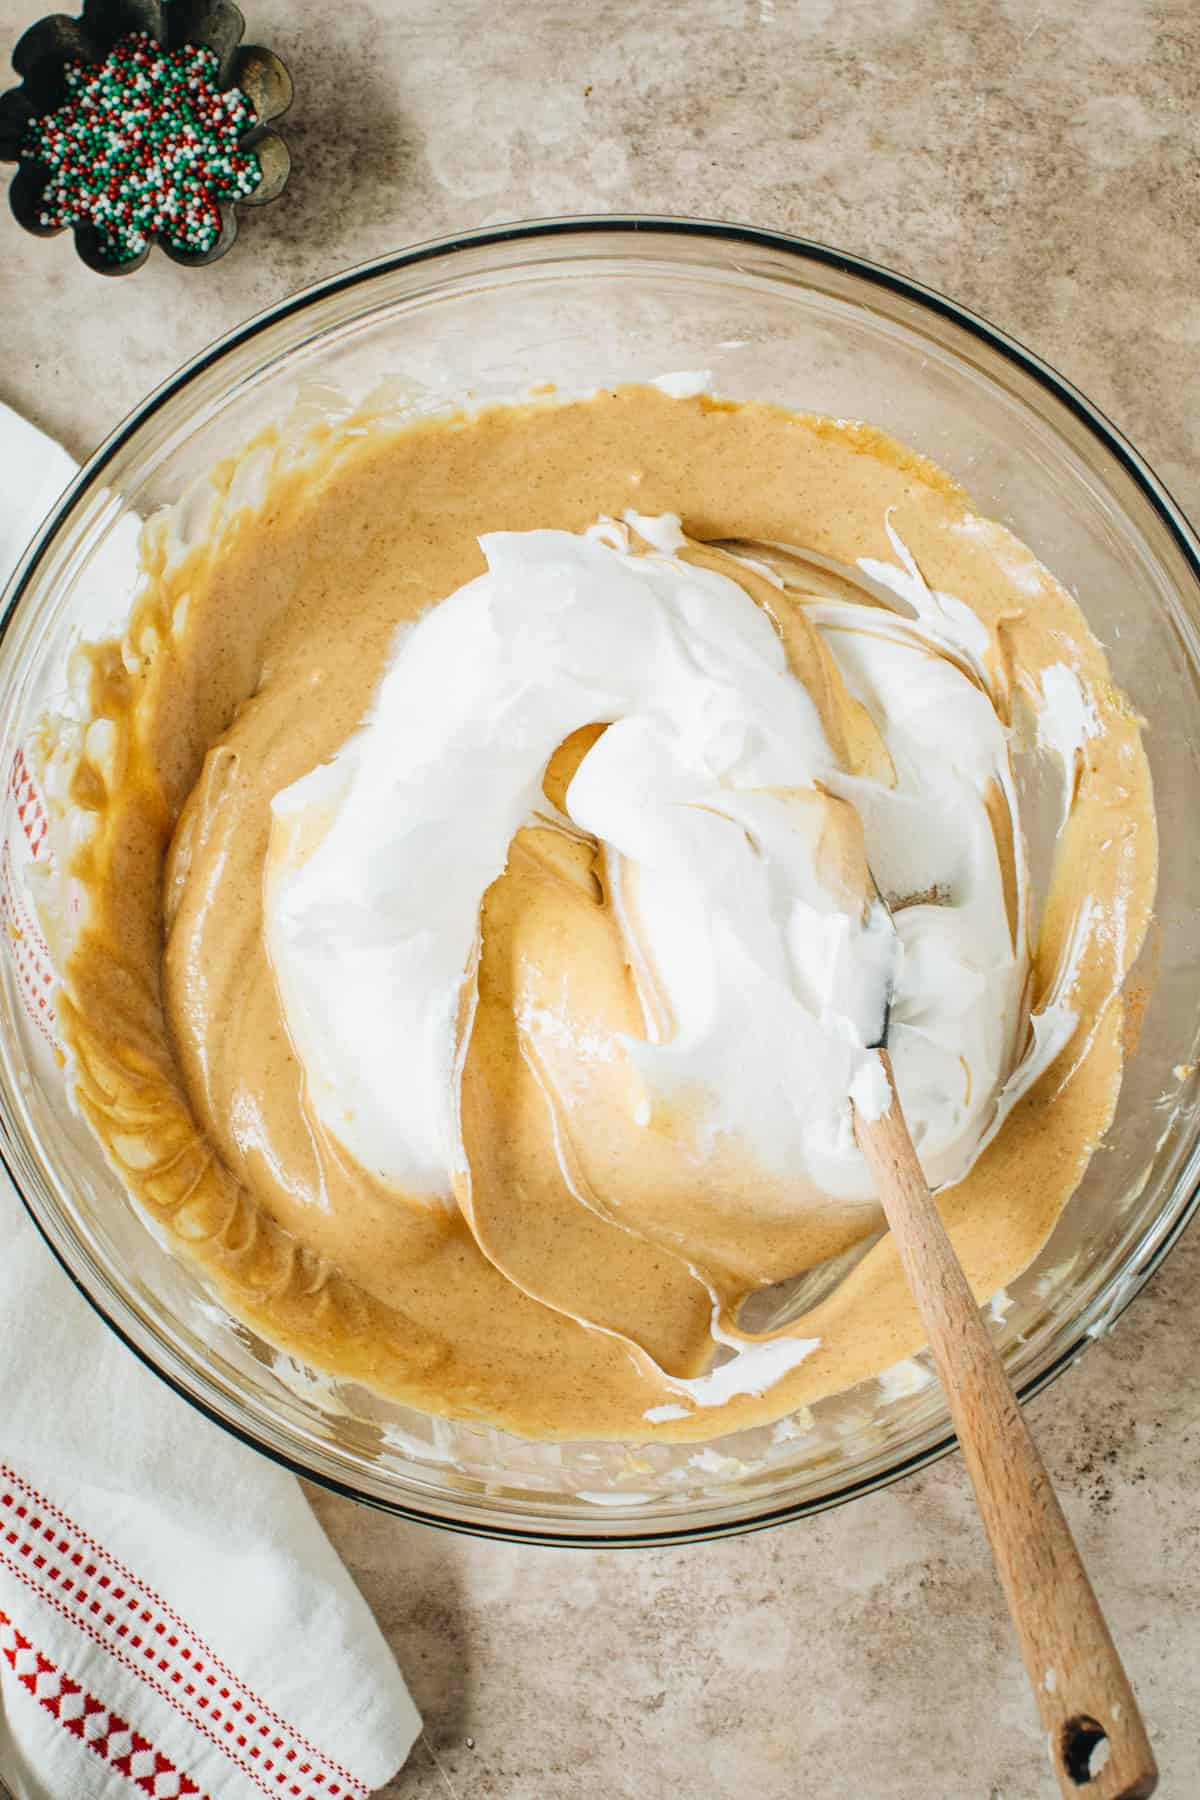 Folding whipped cream into the gingerbread cheesecake dip.